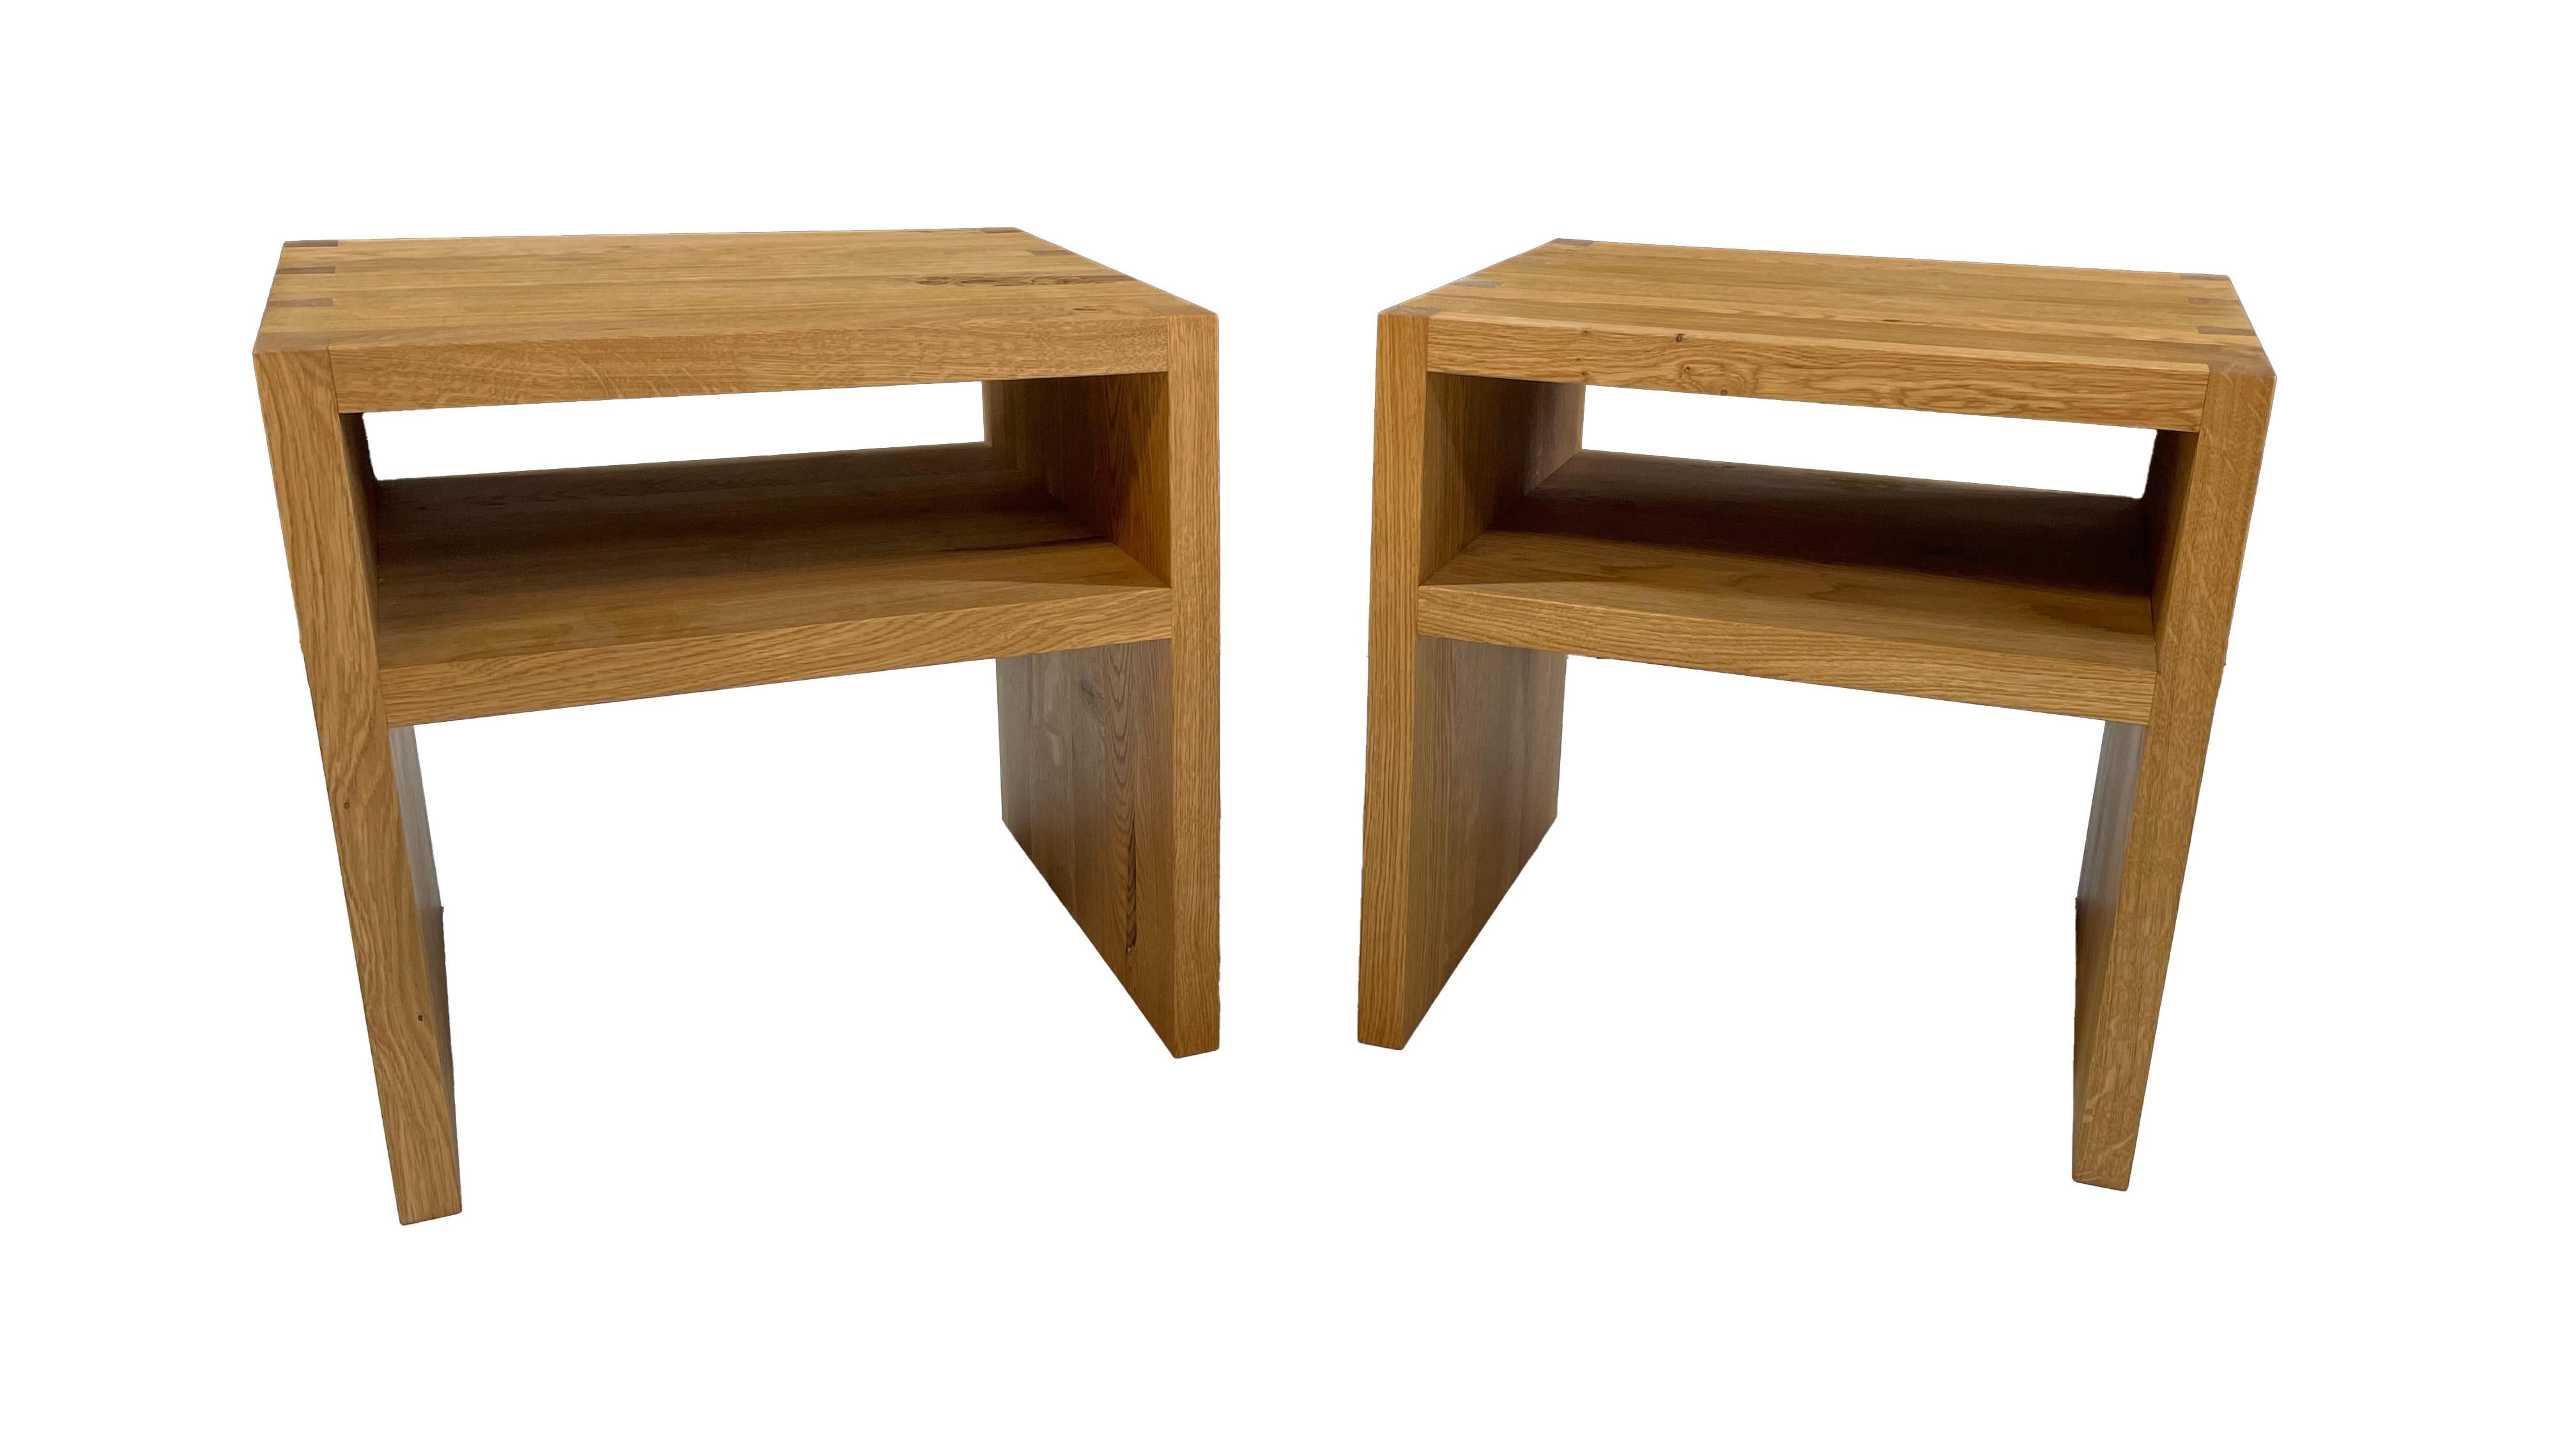 These two solid oak bedside tables are handmade and oiled. Both bedside cabinets are also available in other materials and surfaces upon request. The wood connection consists of a classic tine connection. The price refers to one bedside table only.